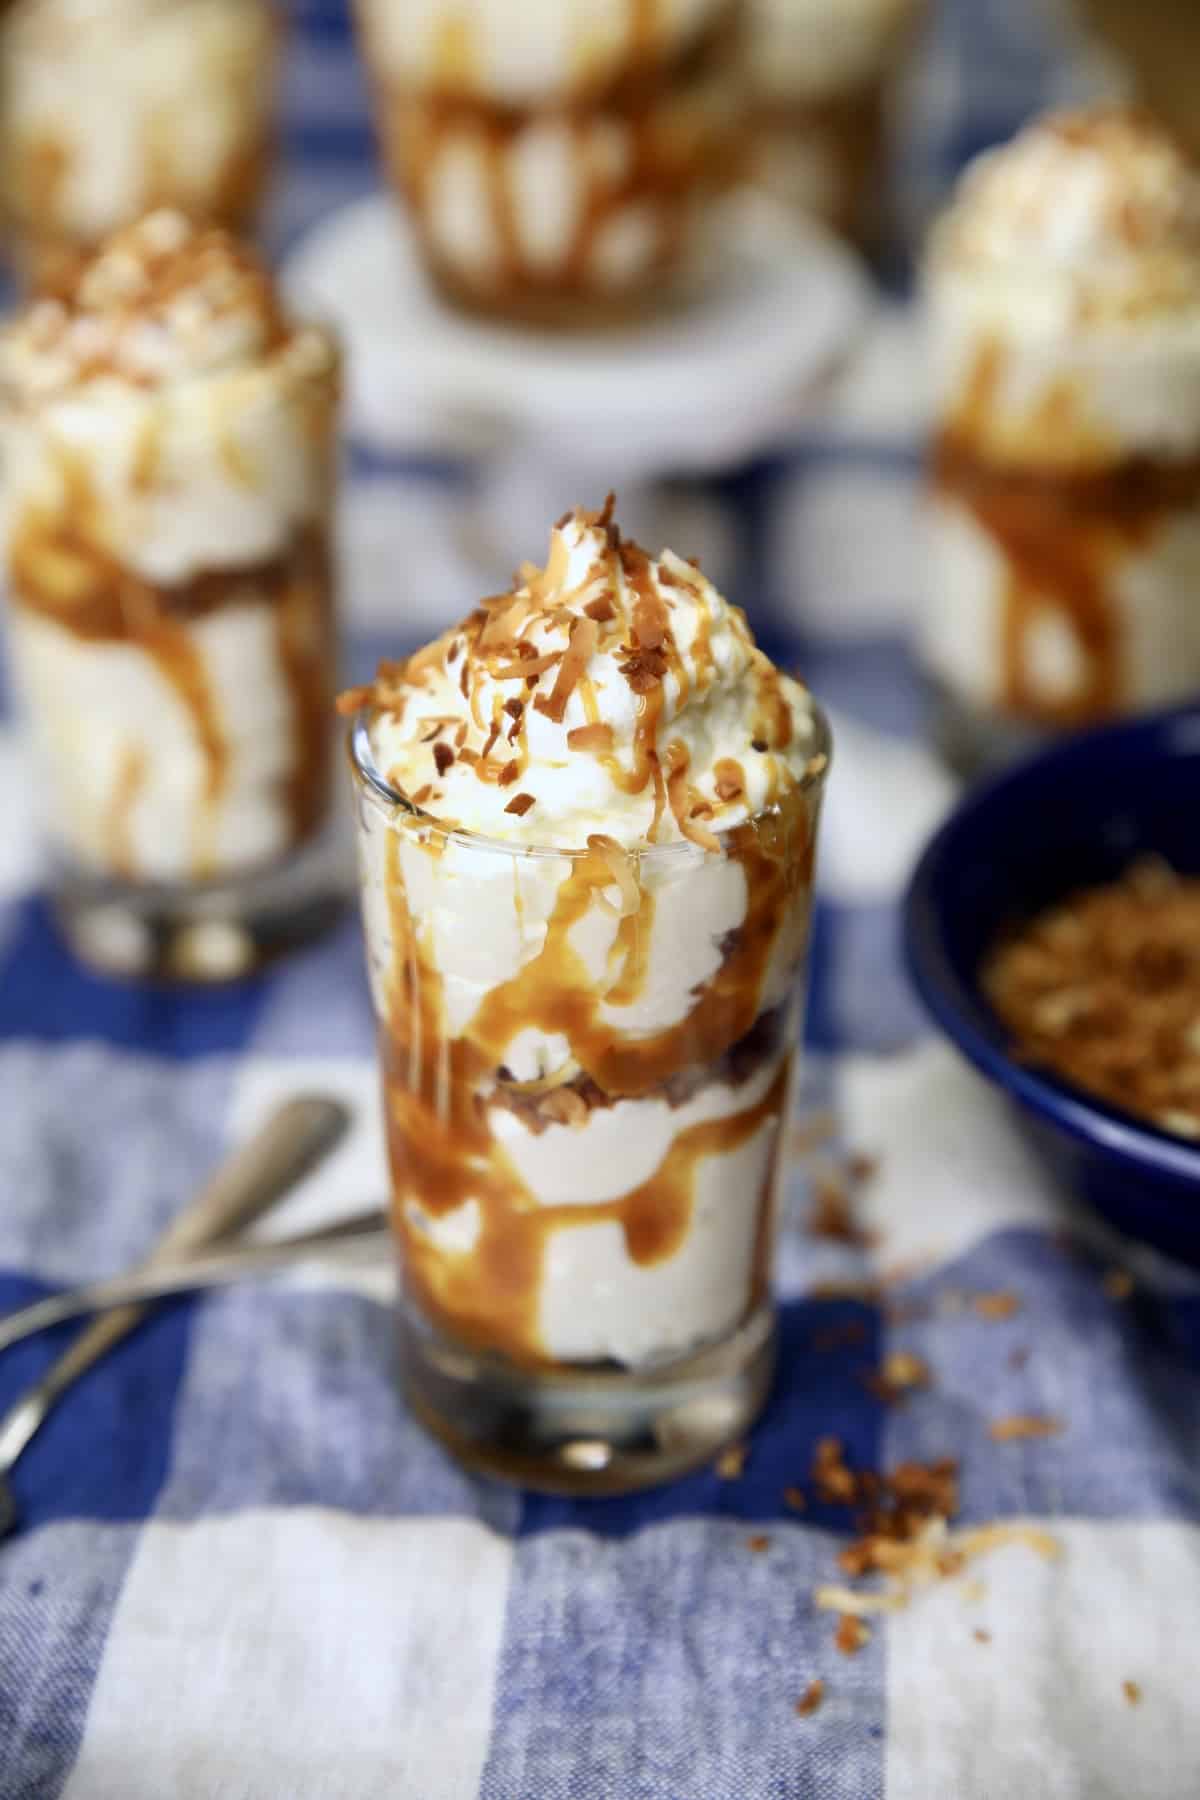 Dessert glasses with coconut cheesecake, caramel drizzle.